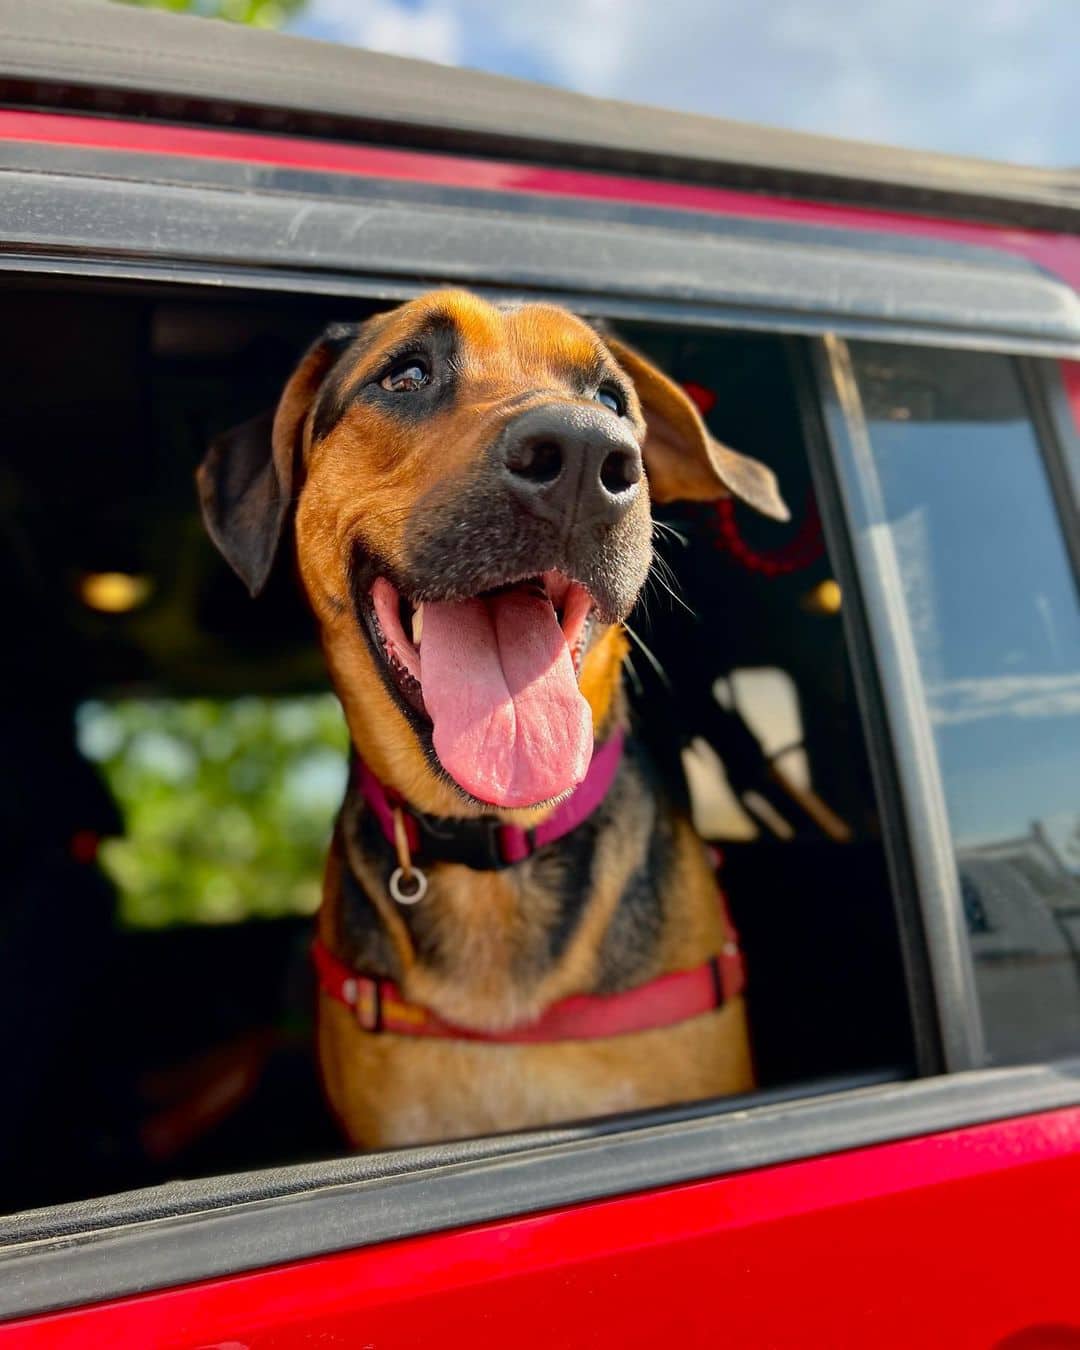 Coonhound German Shepherd Mix rides in the car